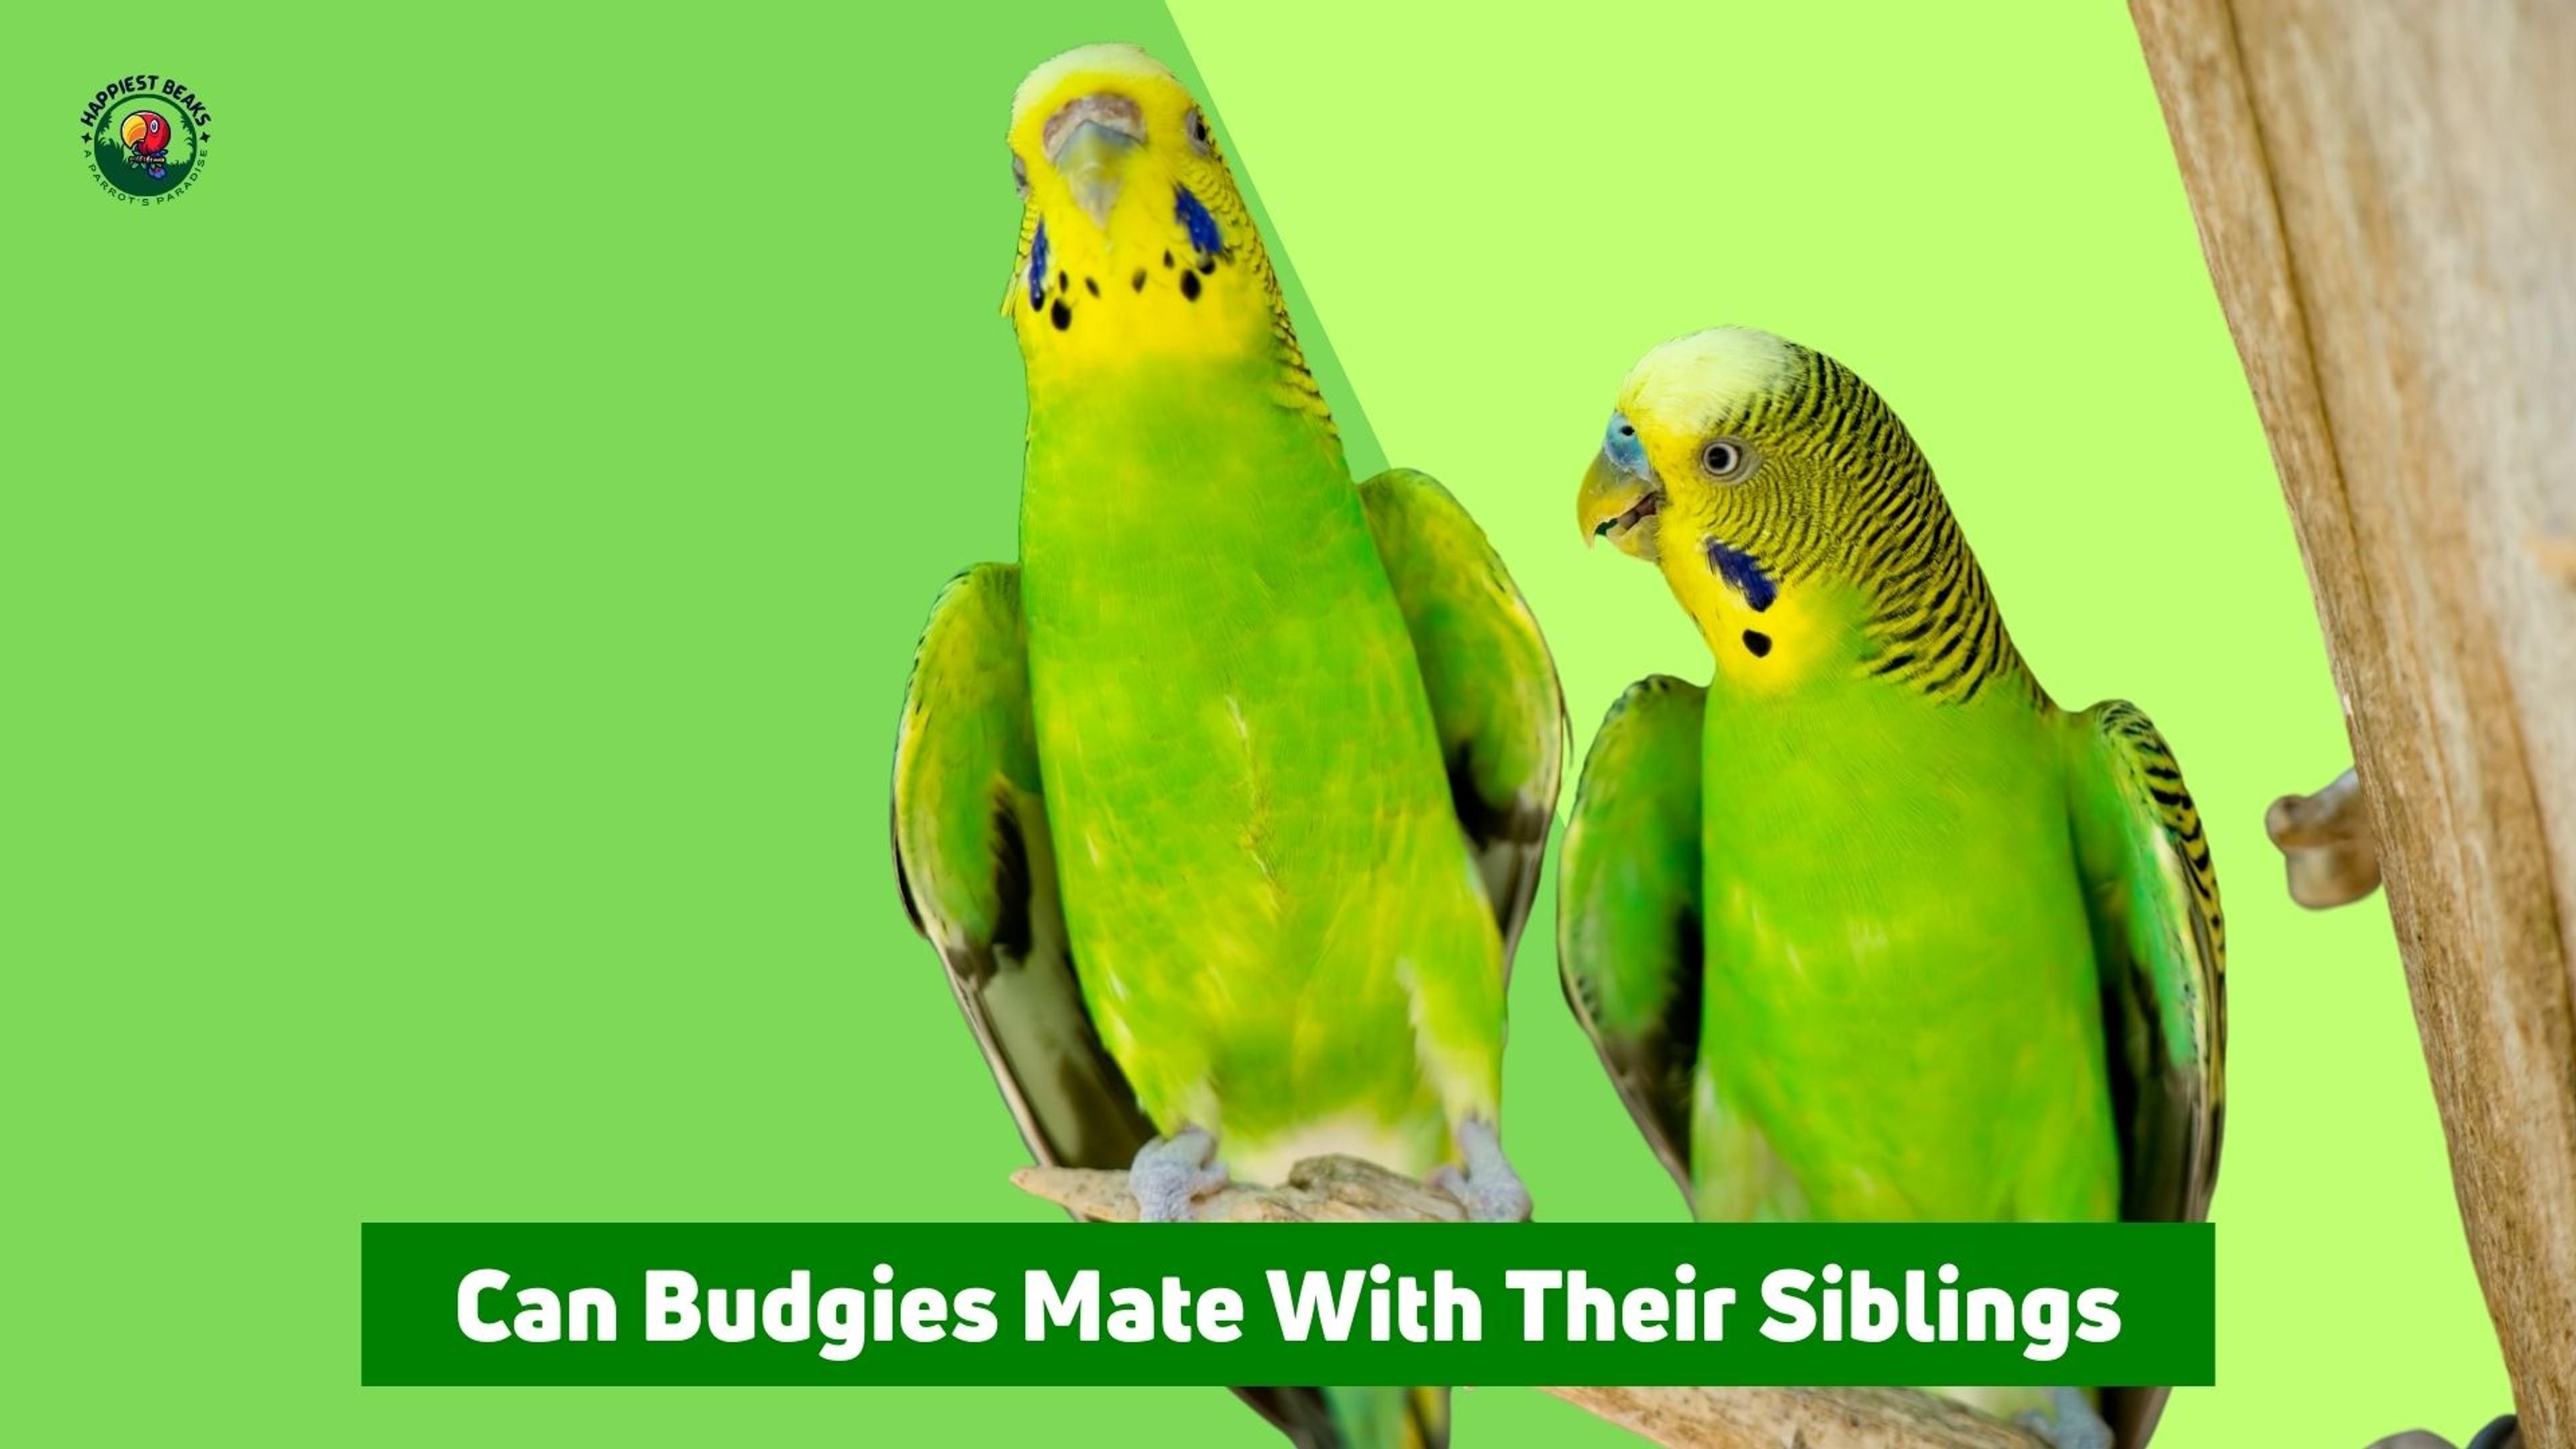 Can Budgies Mate With Their Siblings?